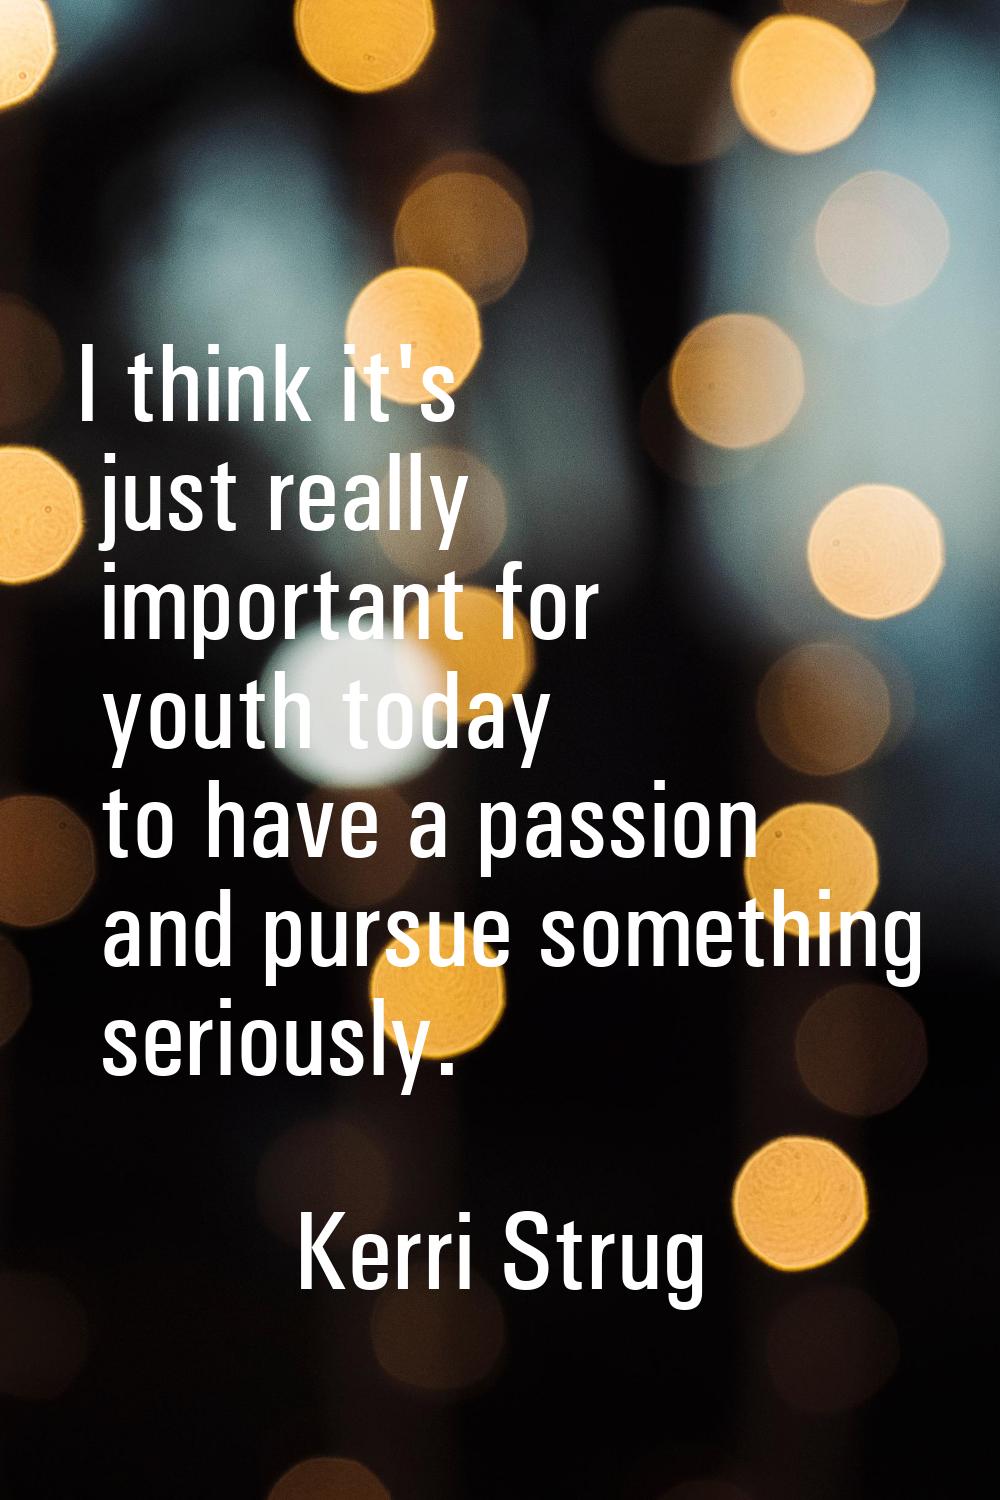 I think it's just really important for youth today to have a passion and pursue something seriously